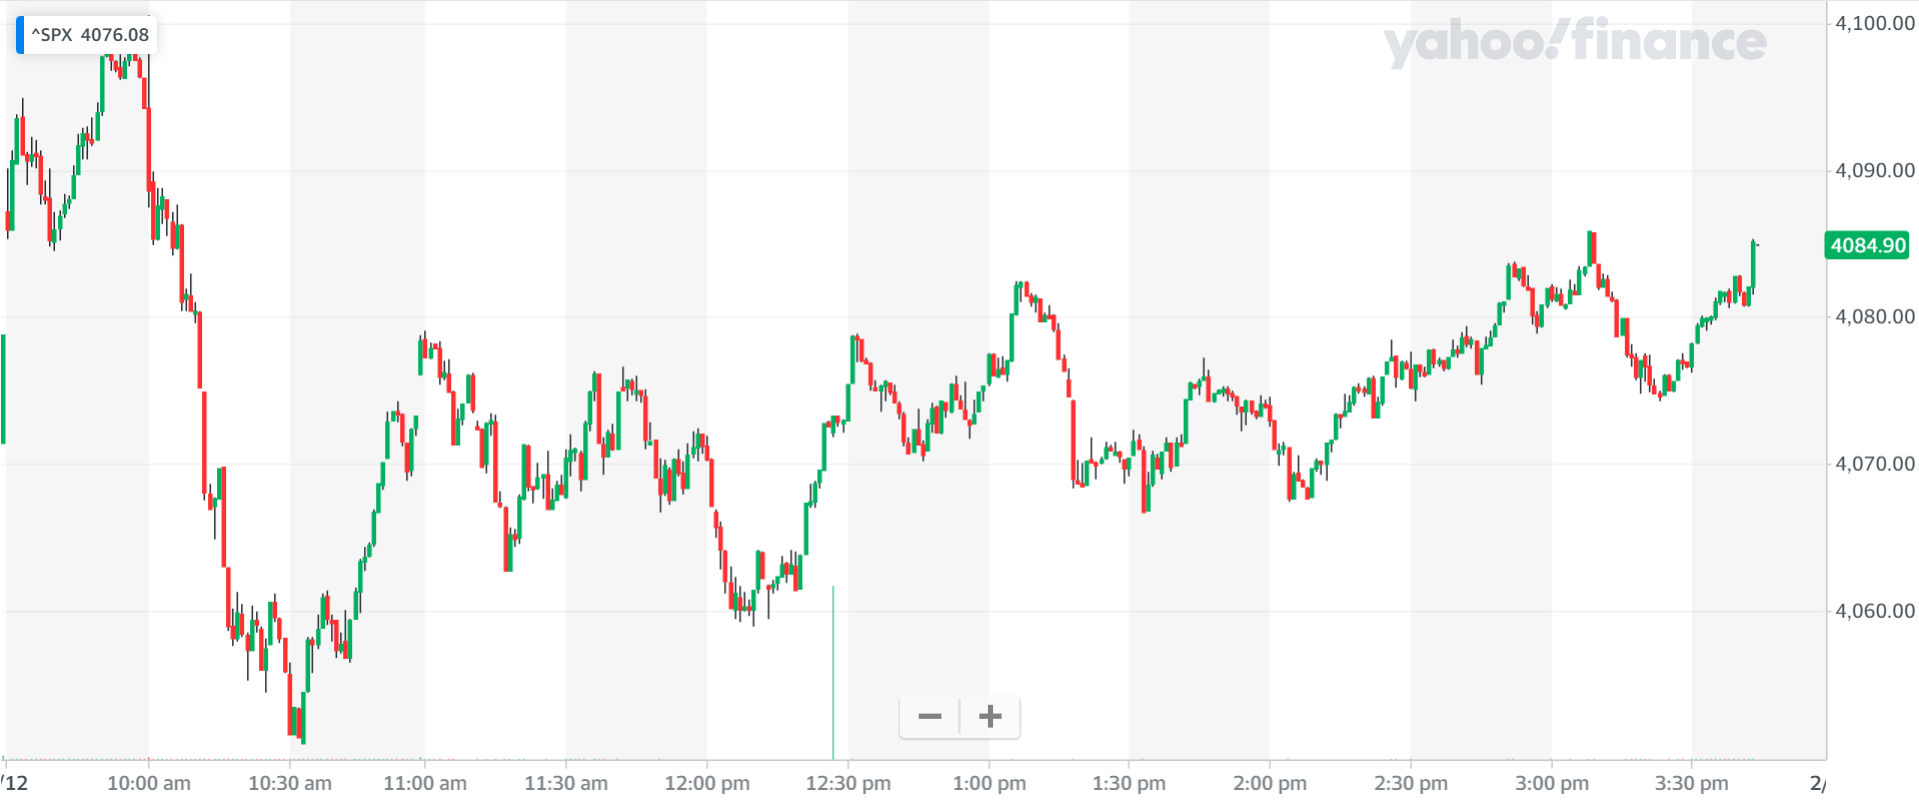 S&P 500 chart of the overnight session - Choppy session helped by a late pop 